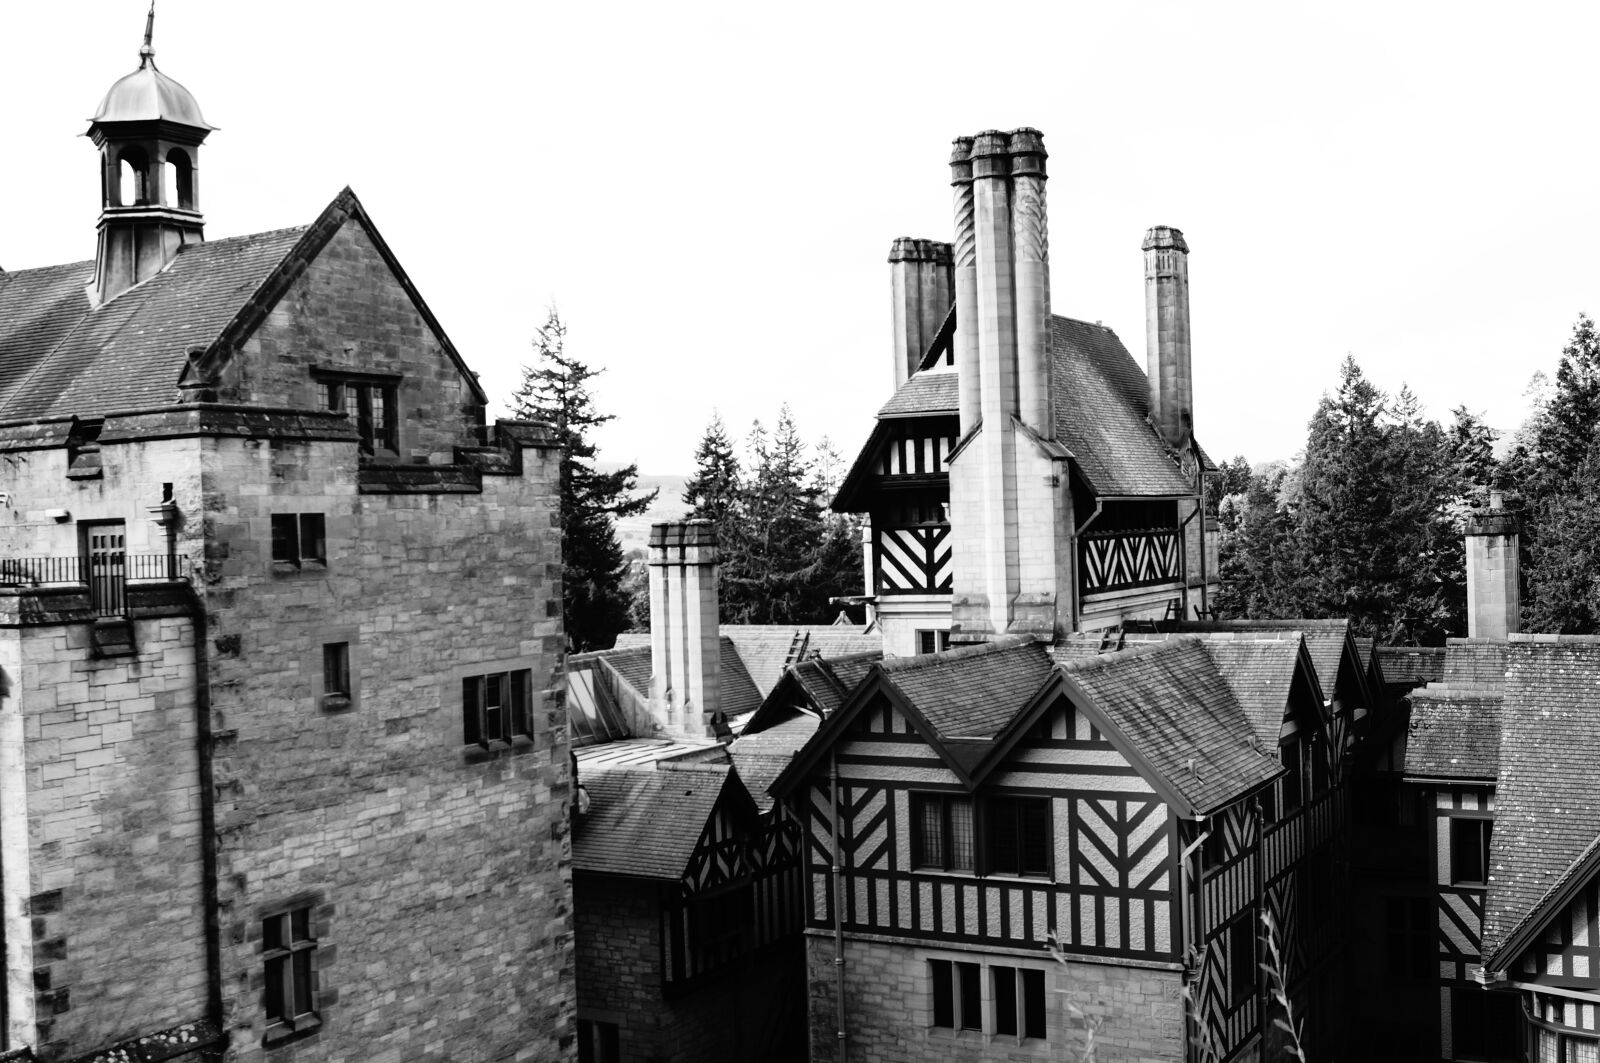 Sony SLT-A57 sample photo. Gothic, castle, architecture photography